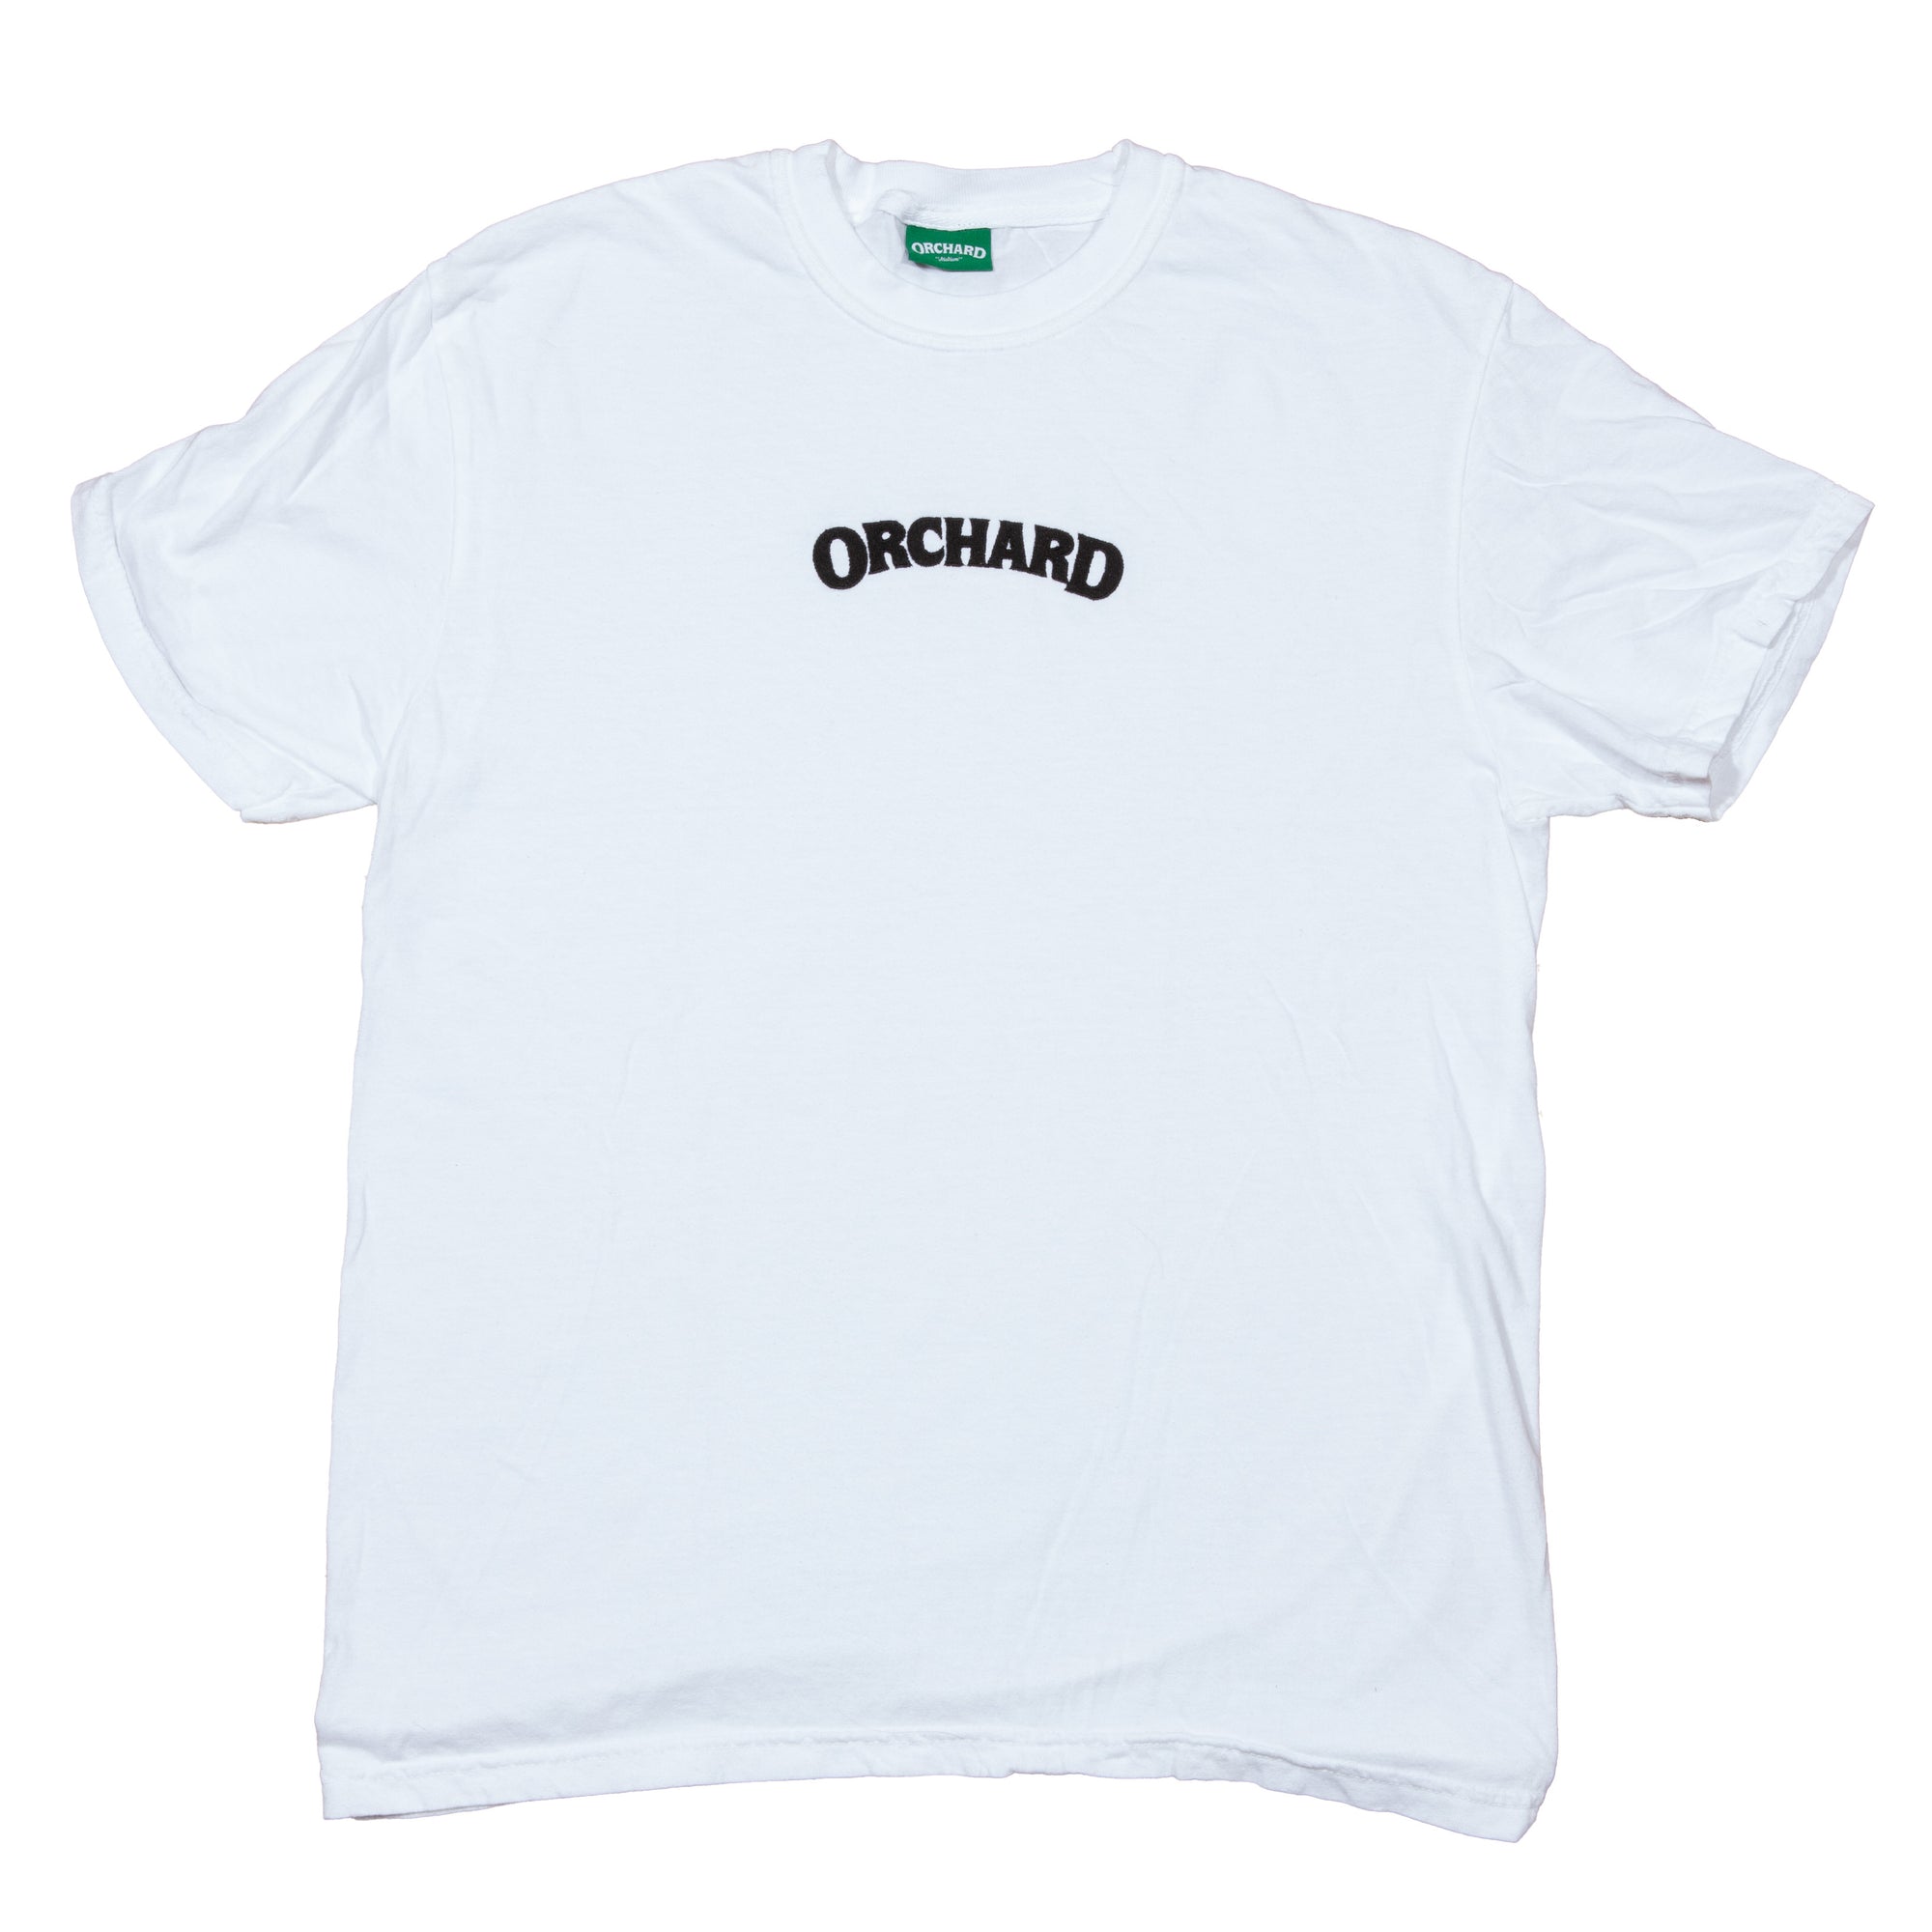 Orchard Embroidered Text Logo Tee White/Black